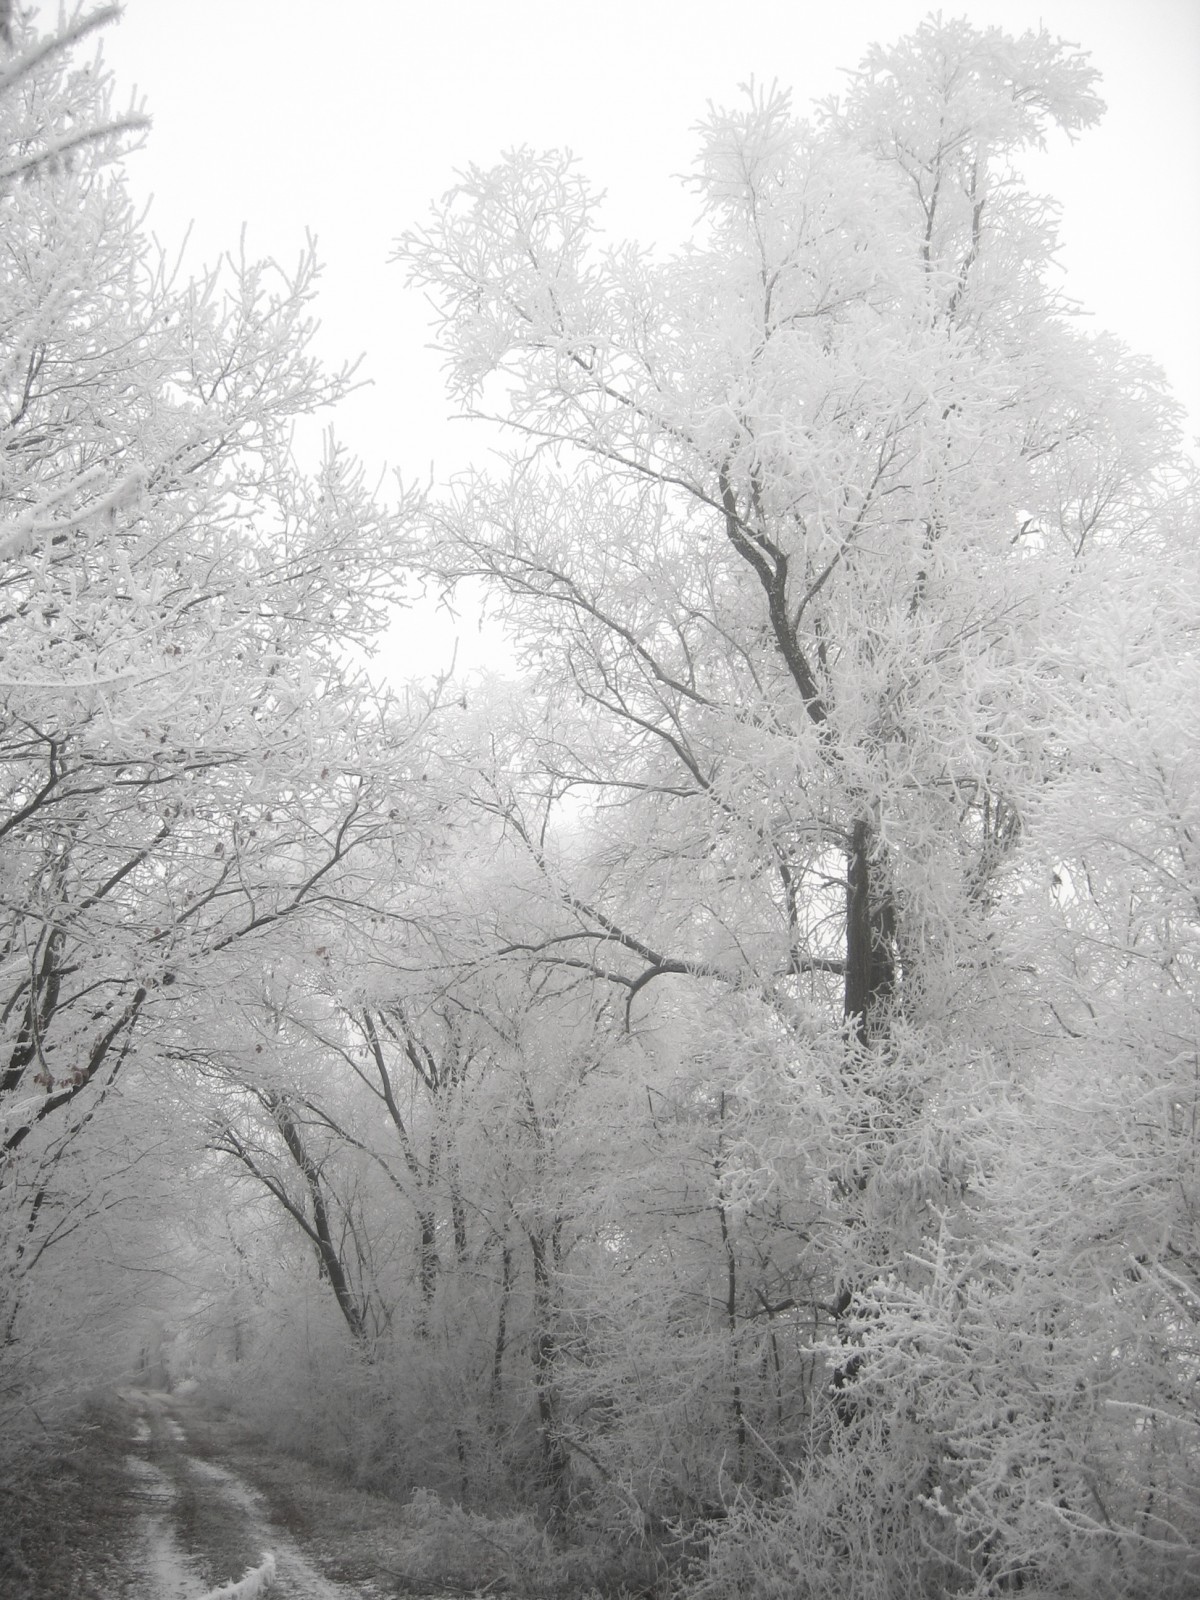 Free Image : tree, nature, forest, branch, cold, black and white, fog, mist, flower, frost, atmosphere, ice, weather, frozen, season, leaves, branches, blizzard, hoarfrost, freezing, winter time, monochrome photography, atmospheric phenomenon, woody